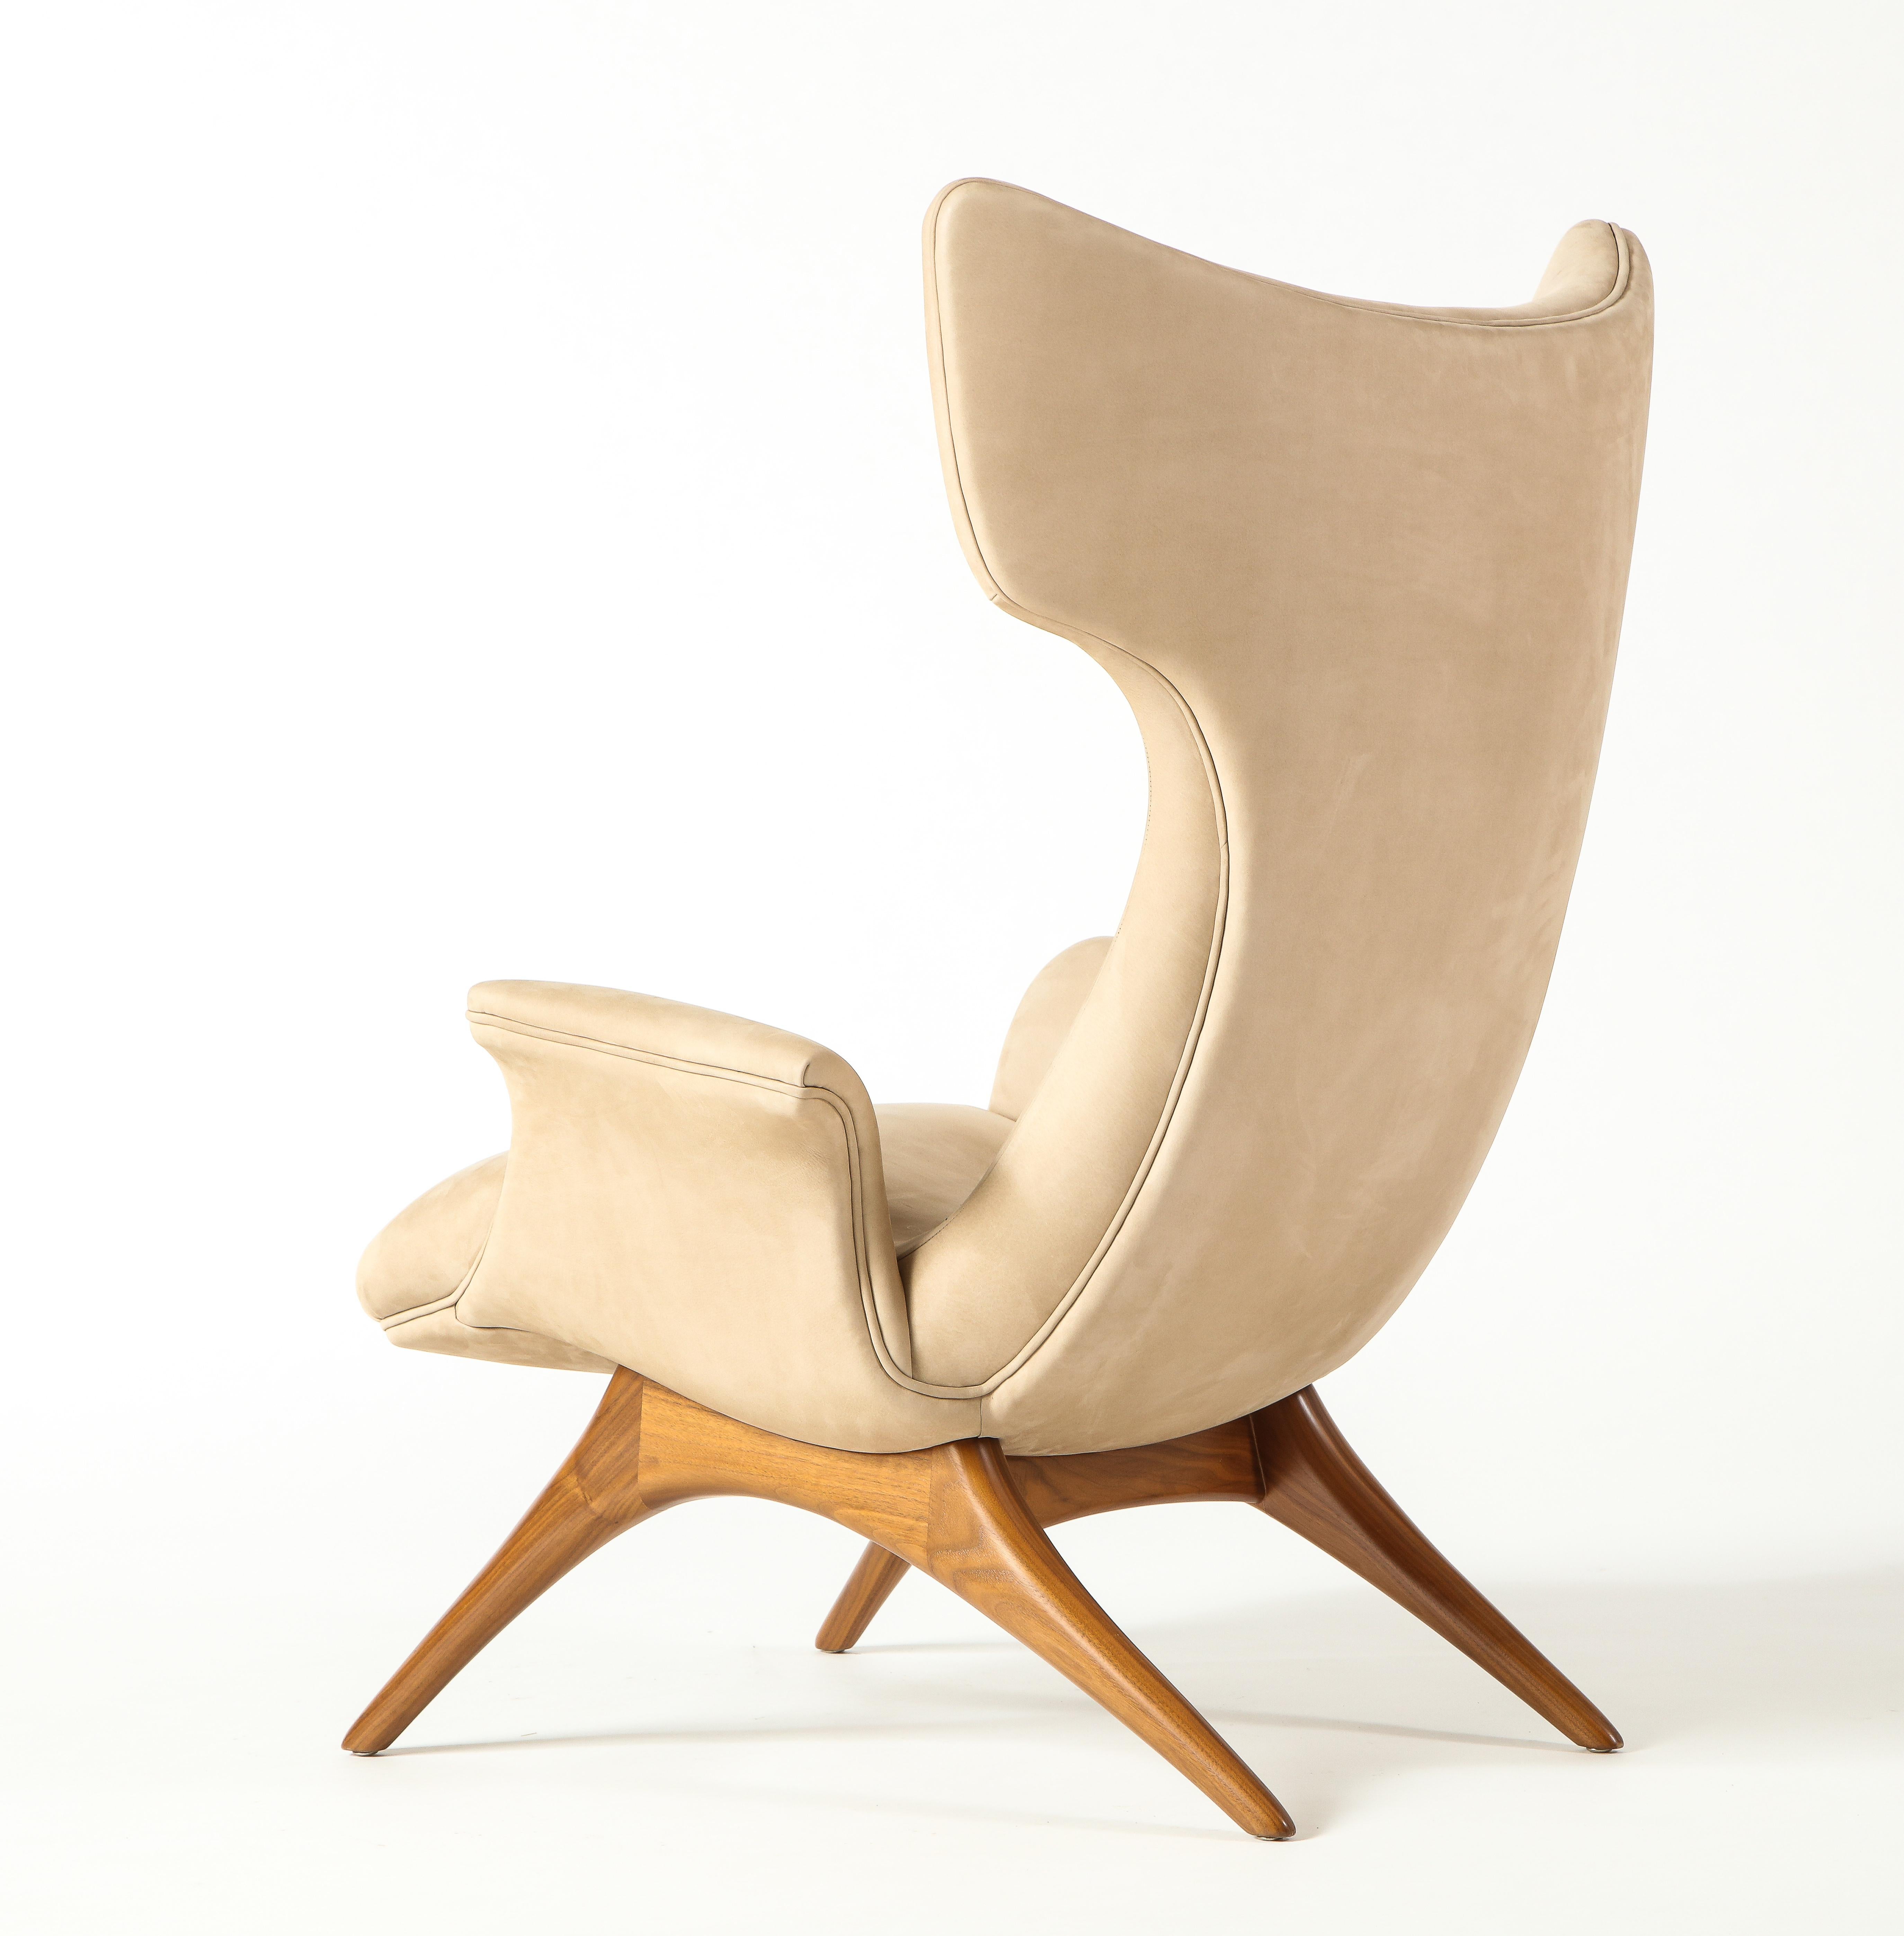 Vladimir Kagan Ondine Chair with Sueded Leather Upholstery & Natural Walnut Base 1